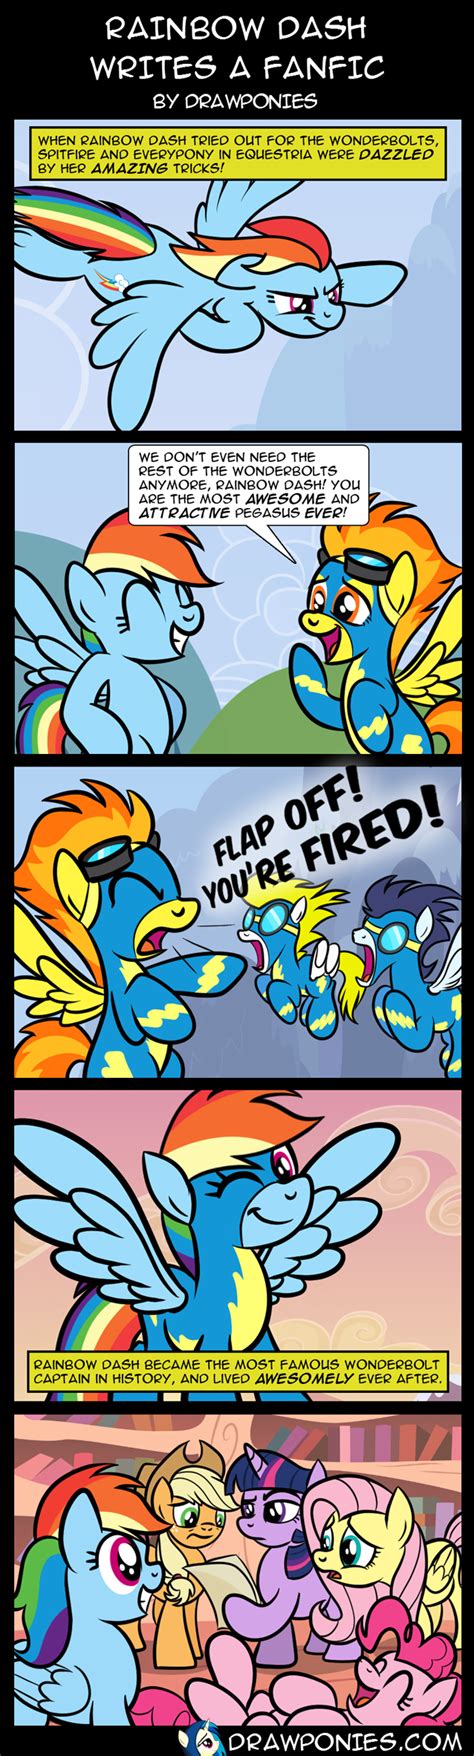 Comic Rainbow Dash Writes A Fanfic By Drawponies On Deviantart